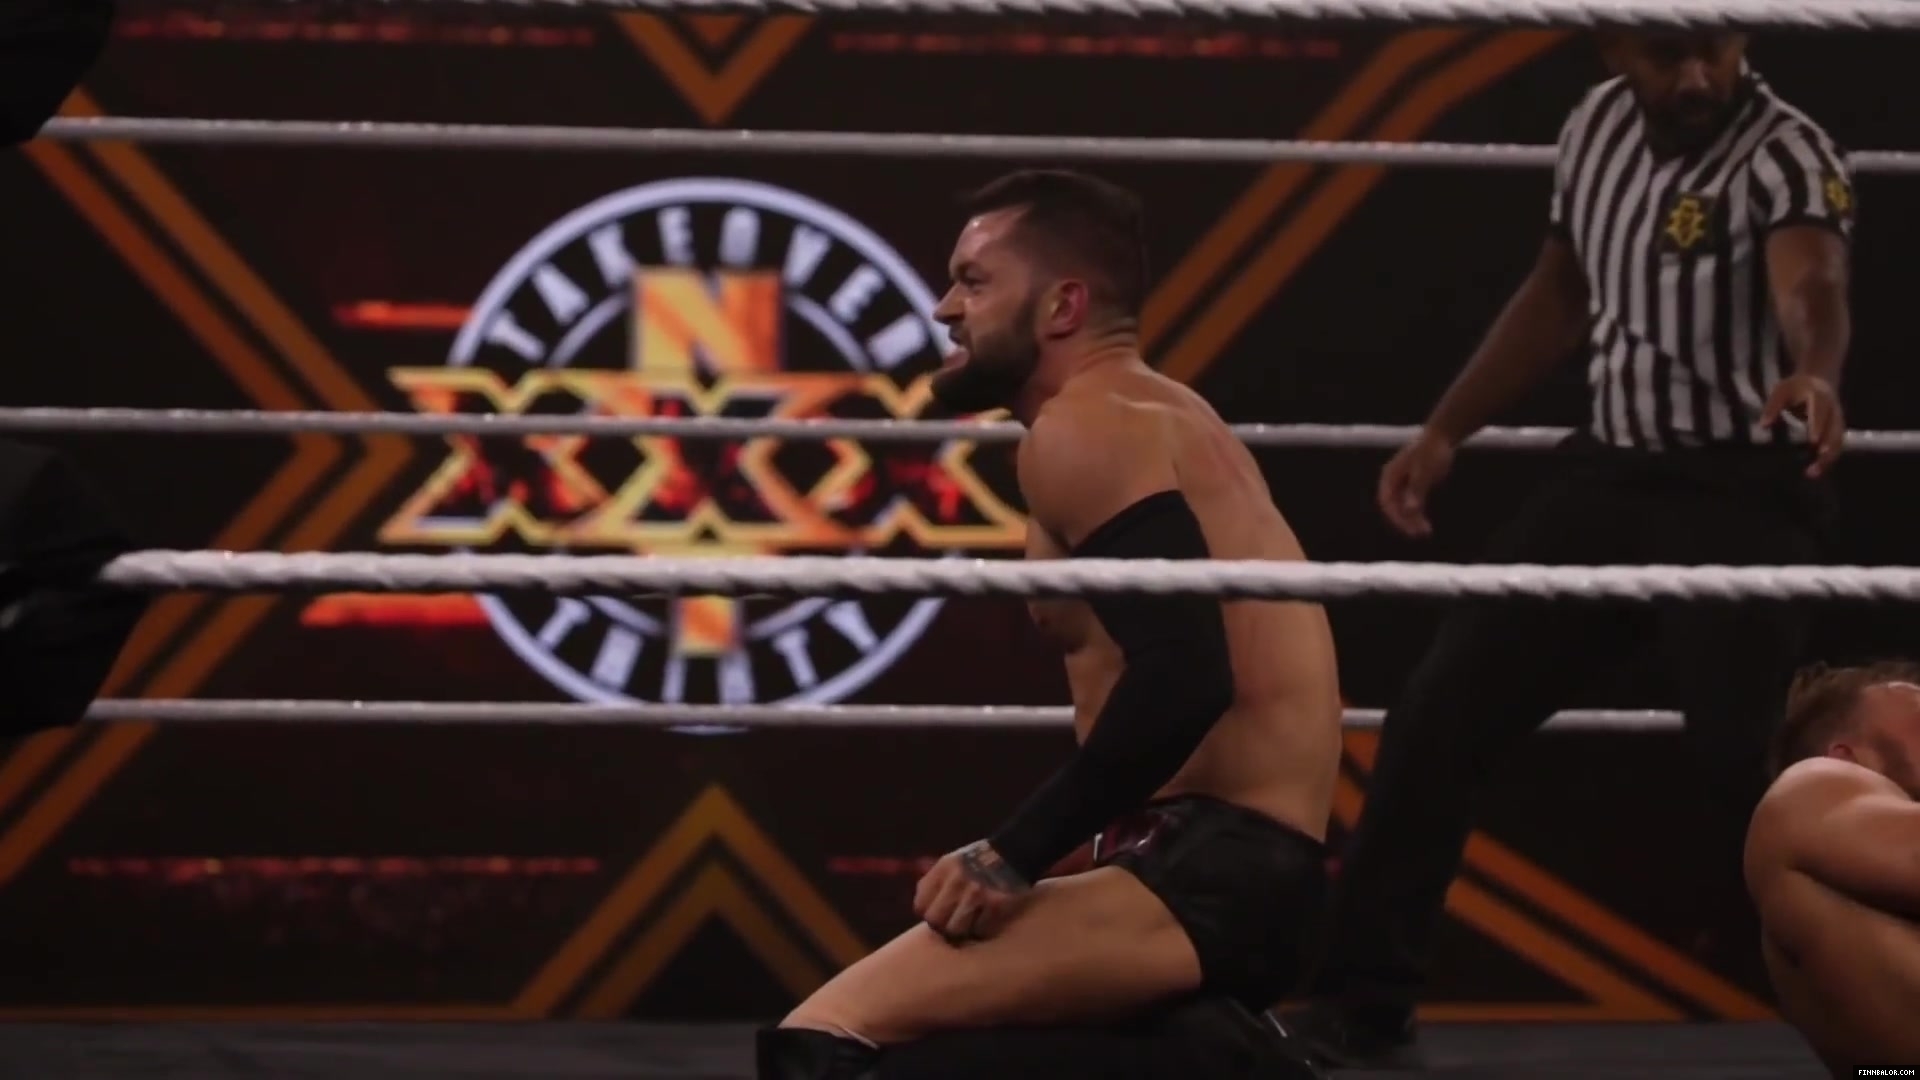 Finn_Balor___The_Rising_of_the_Prince_in_NXT_568.jpg